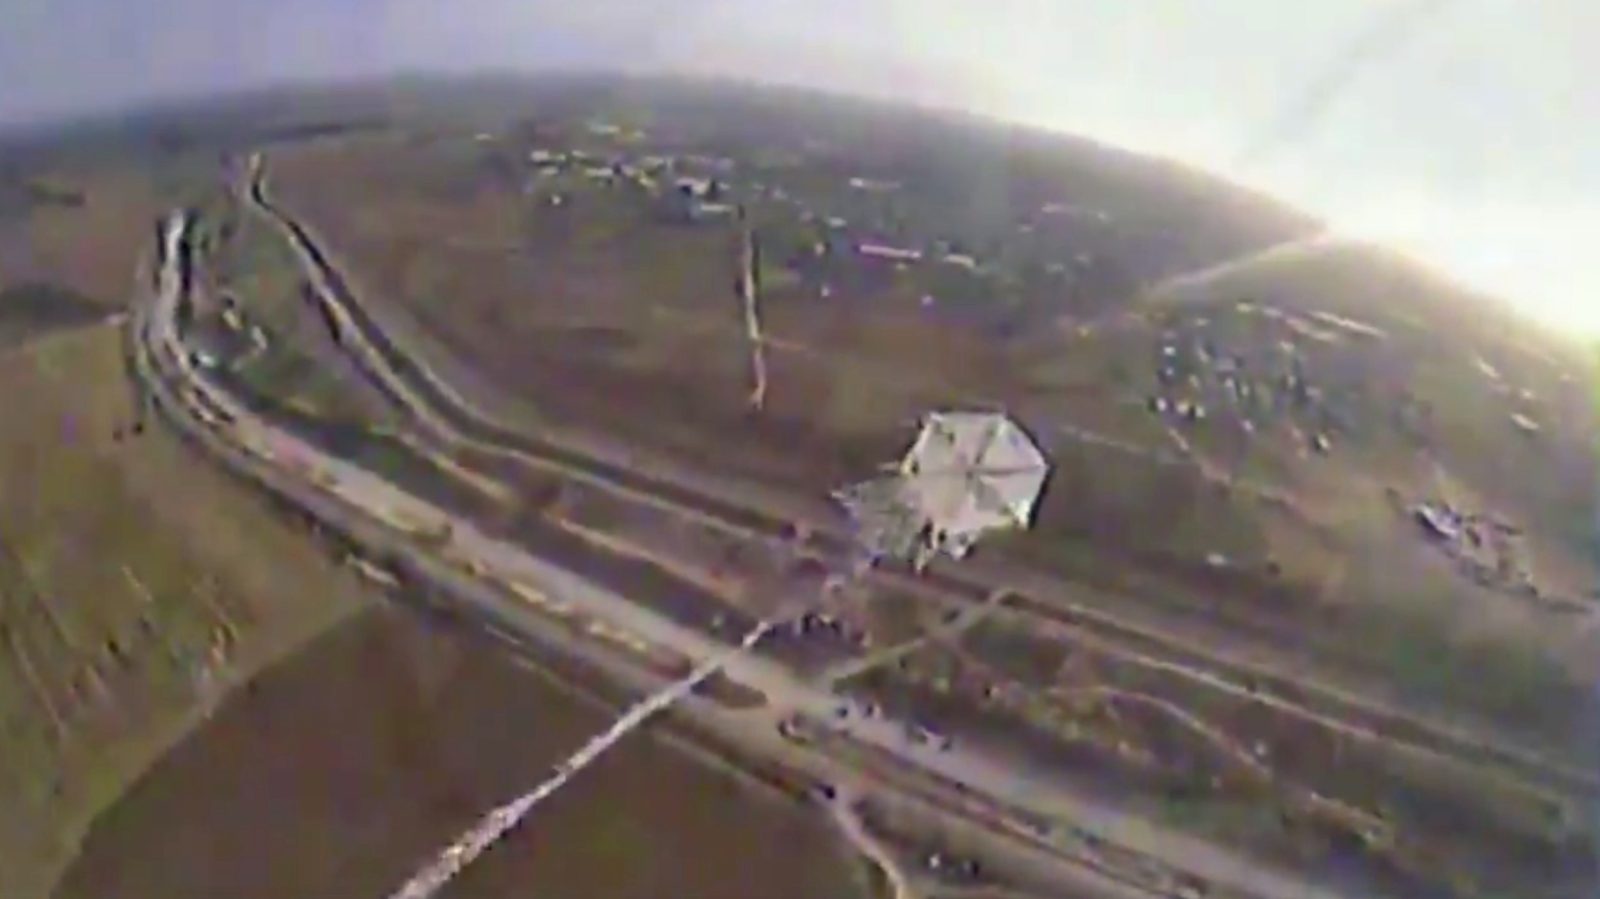 Onboard video footage from Israeli drones as they take down a 'fire kite'